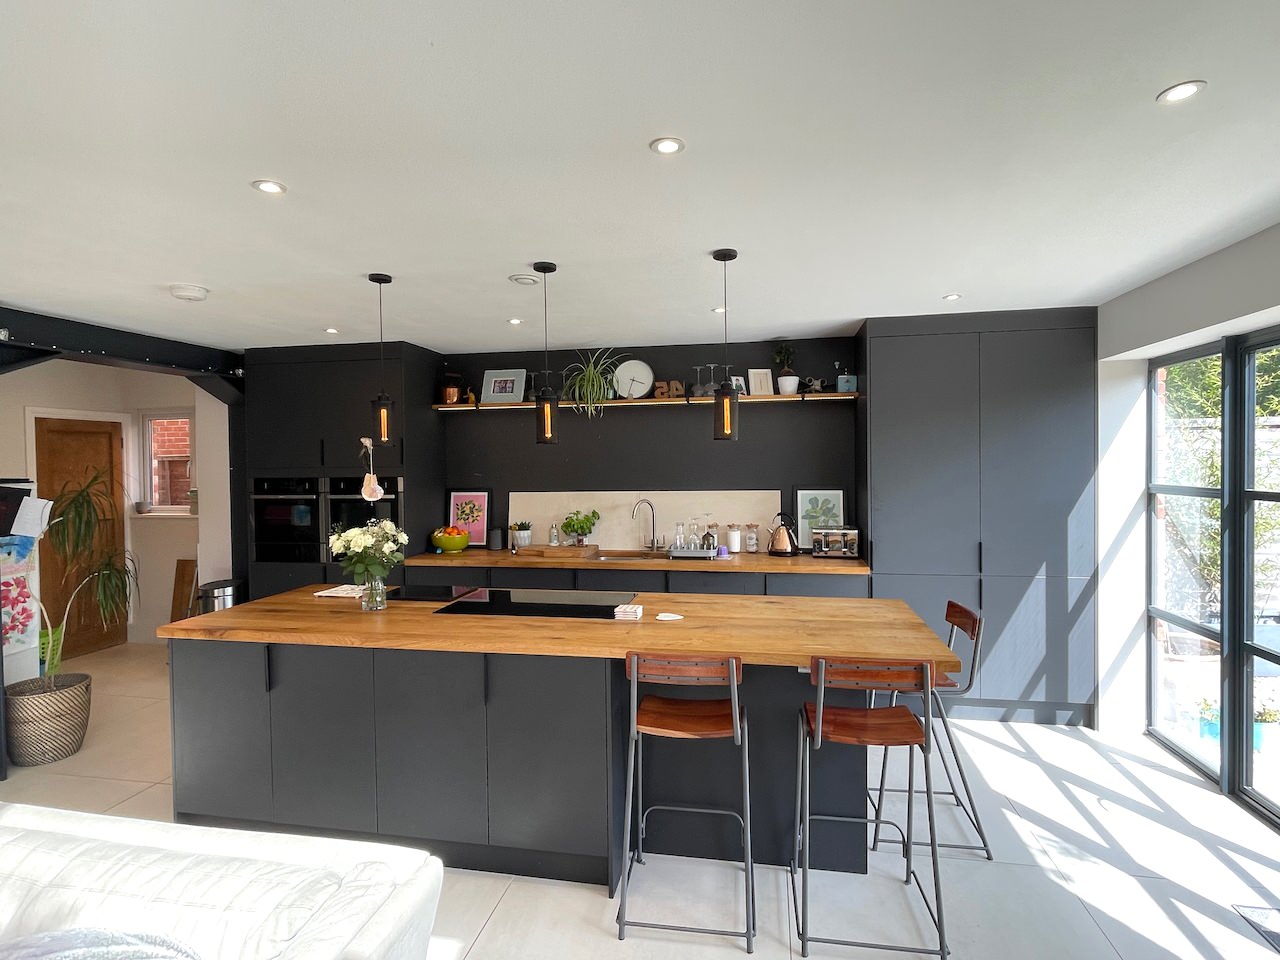 A creative, kitchen design! The extension allows for open plan living, and a space where the light fills the room. A statement kitchen island that converted a traditional L-shaped kitchen into a commu